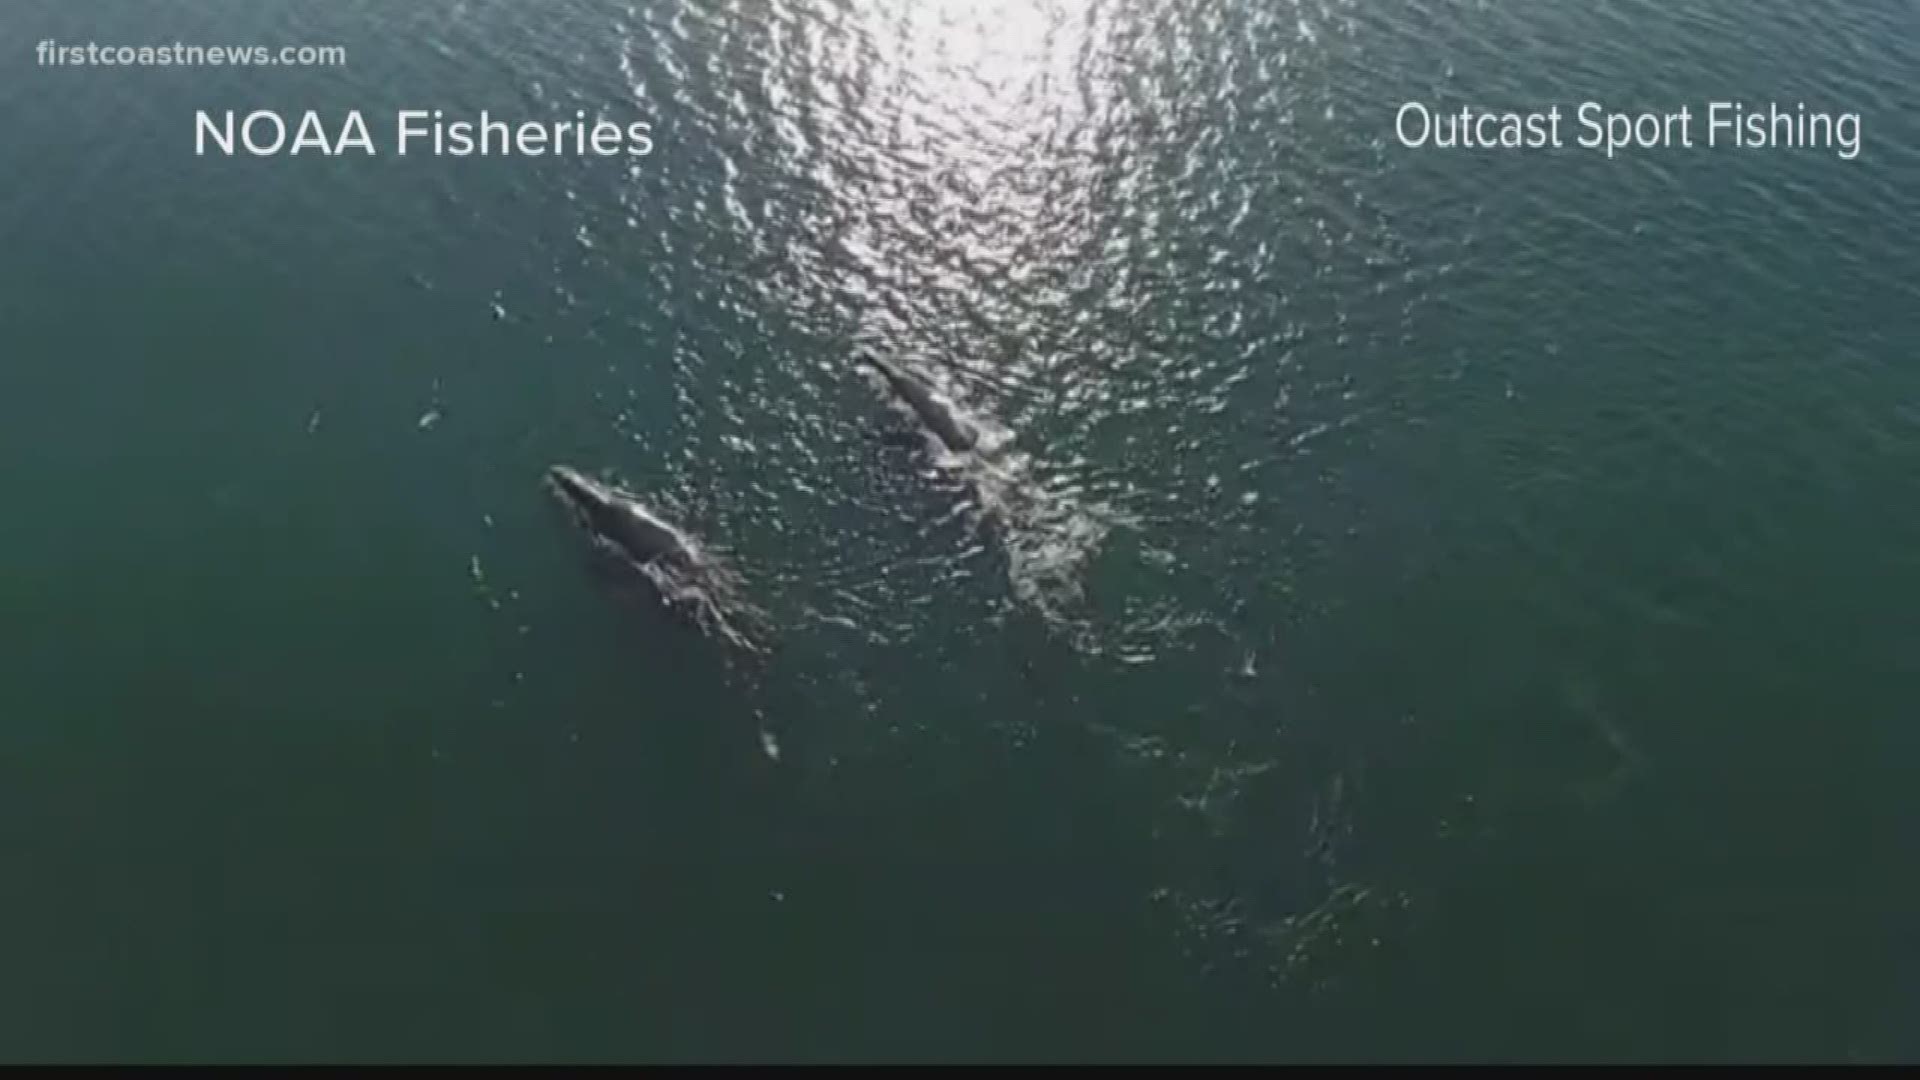 One of the leading causes of death for these whales is getting hit by boats.